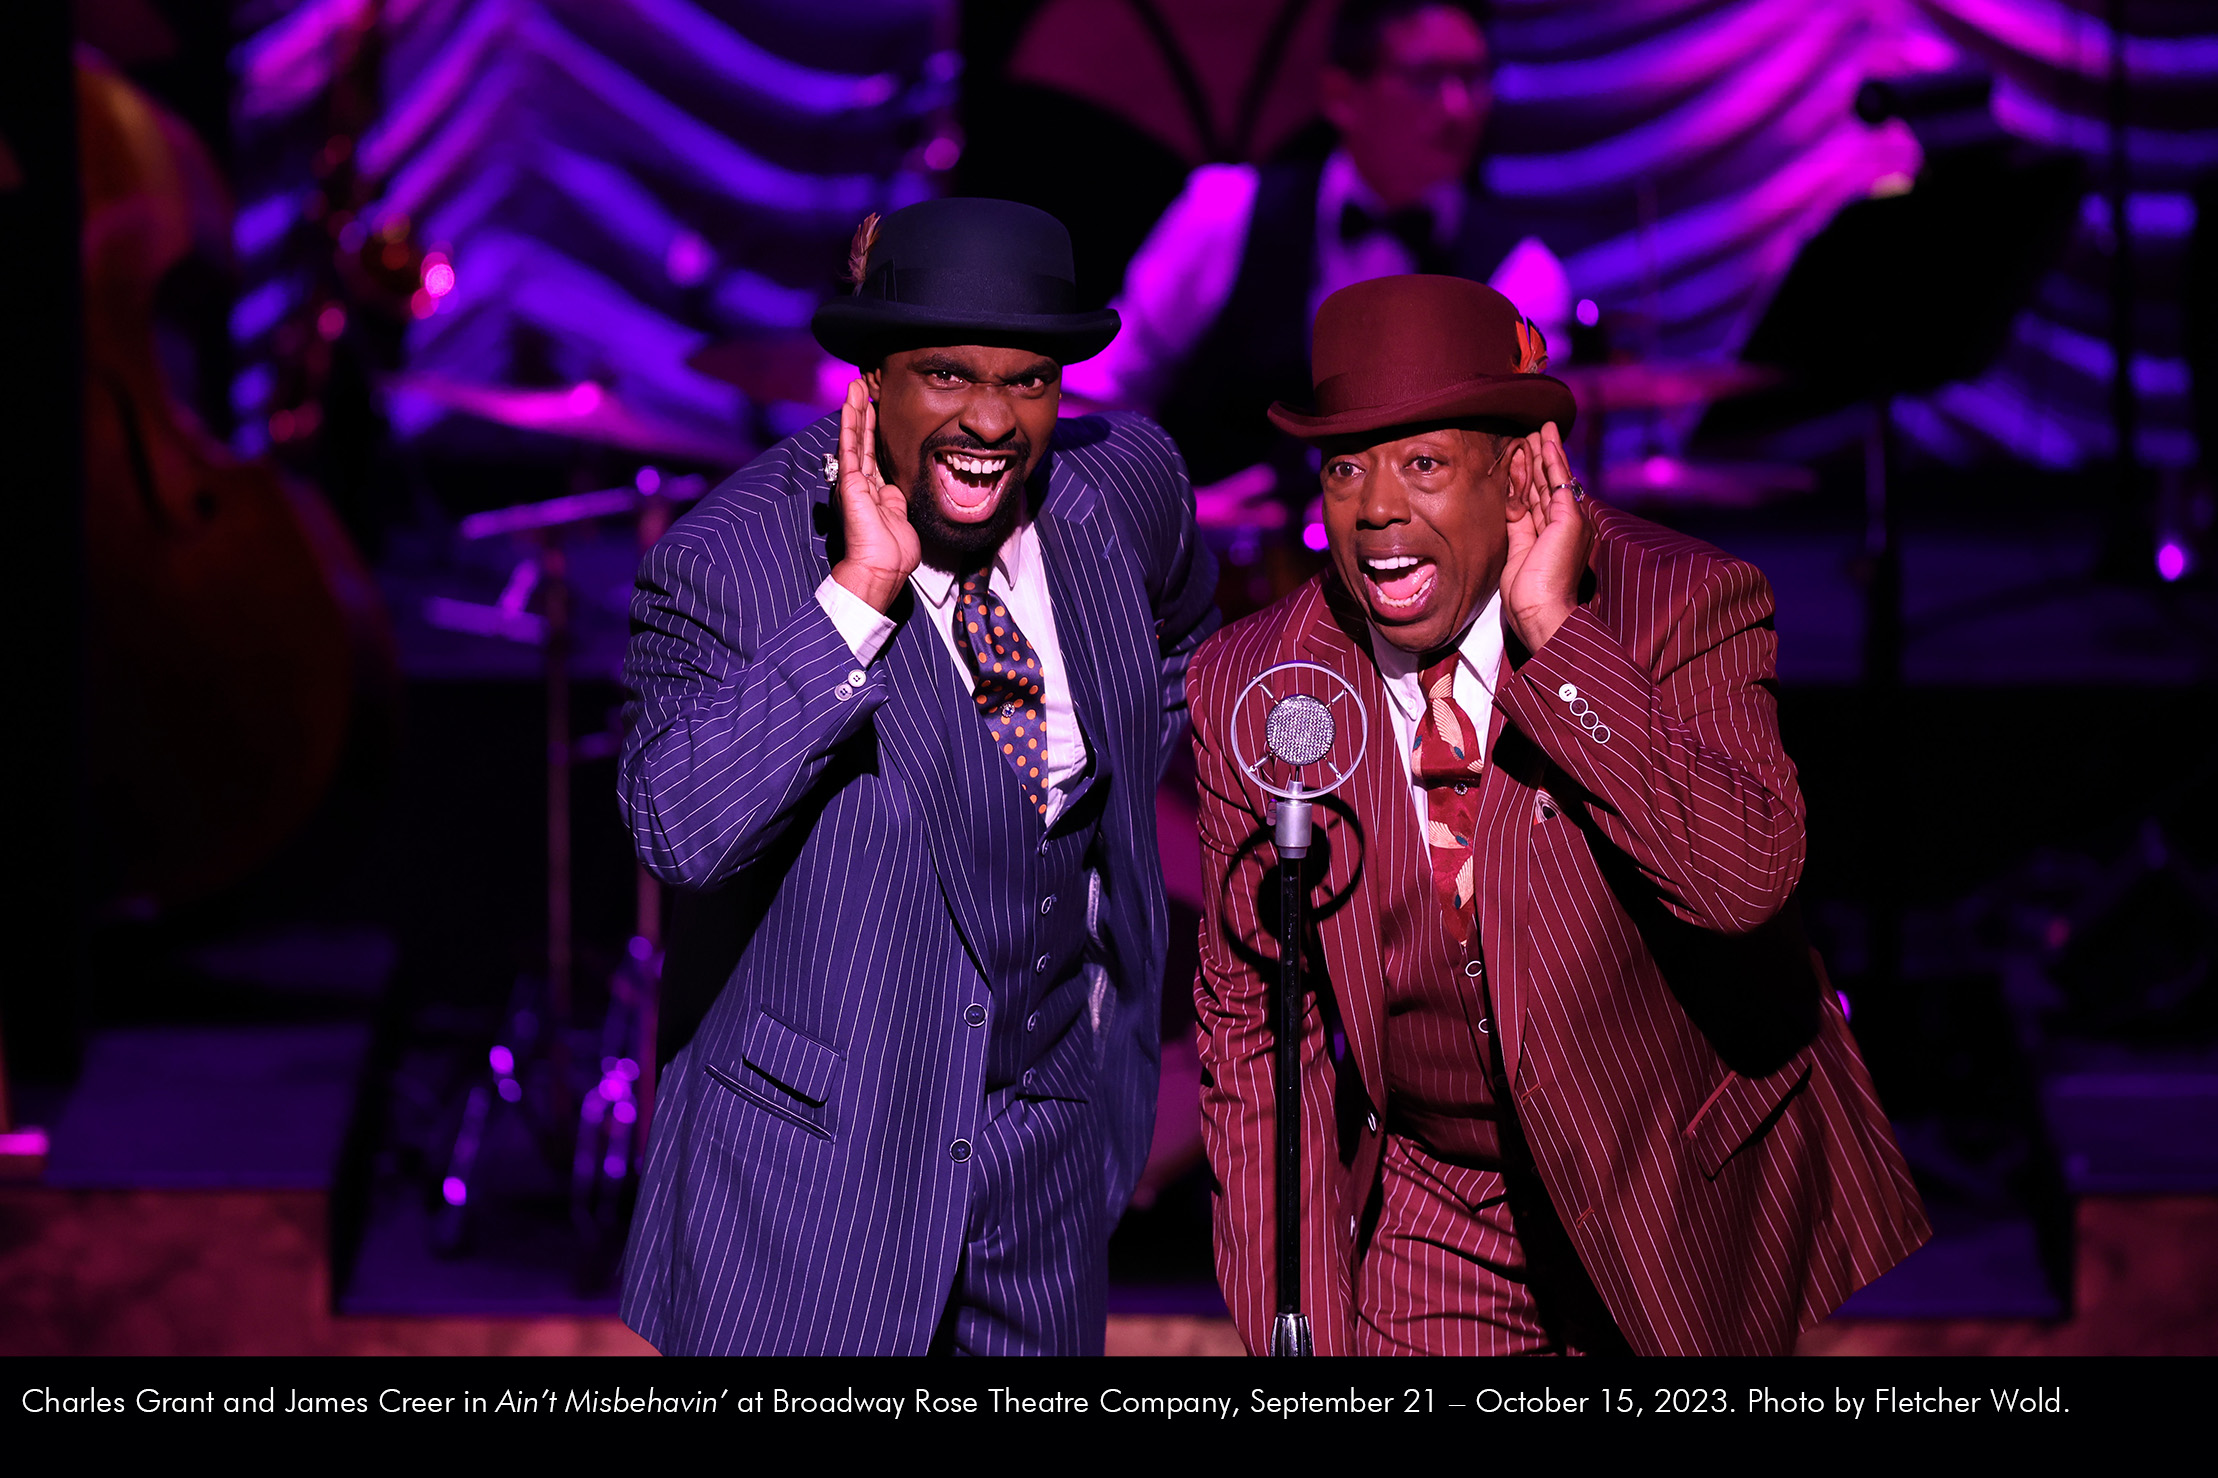 Charles Grant and James Creer in Ain't Misbehavin' at Broadway Rose Theatre Company, September 21 - October 15, 2023. Photo by Fletcher Wold.